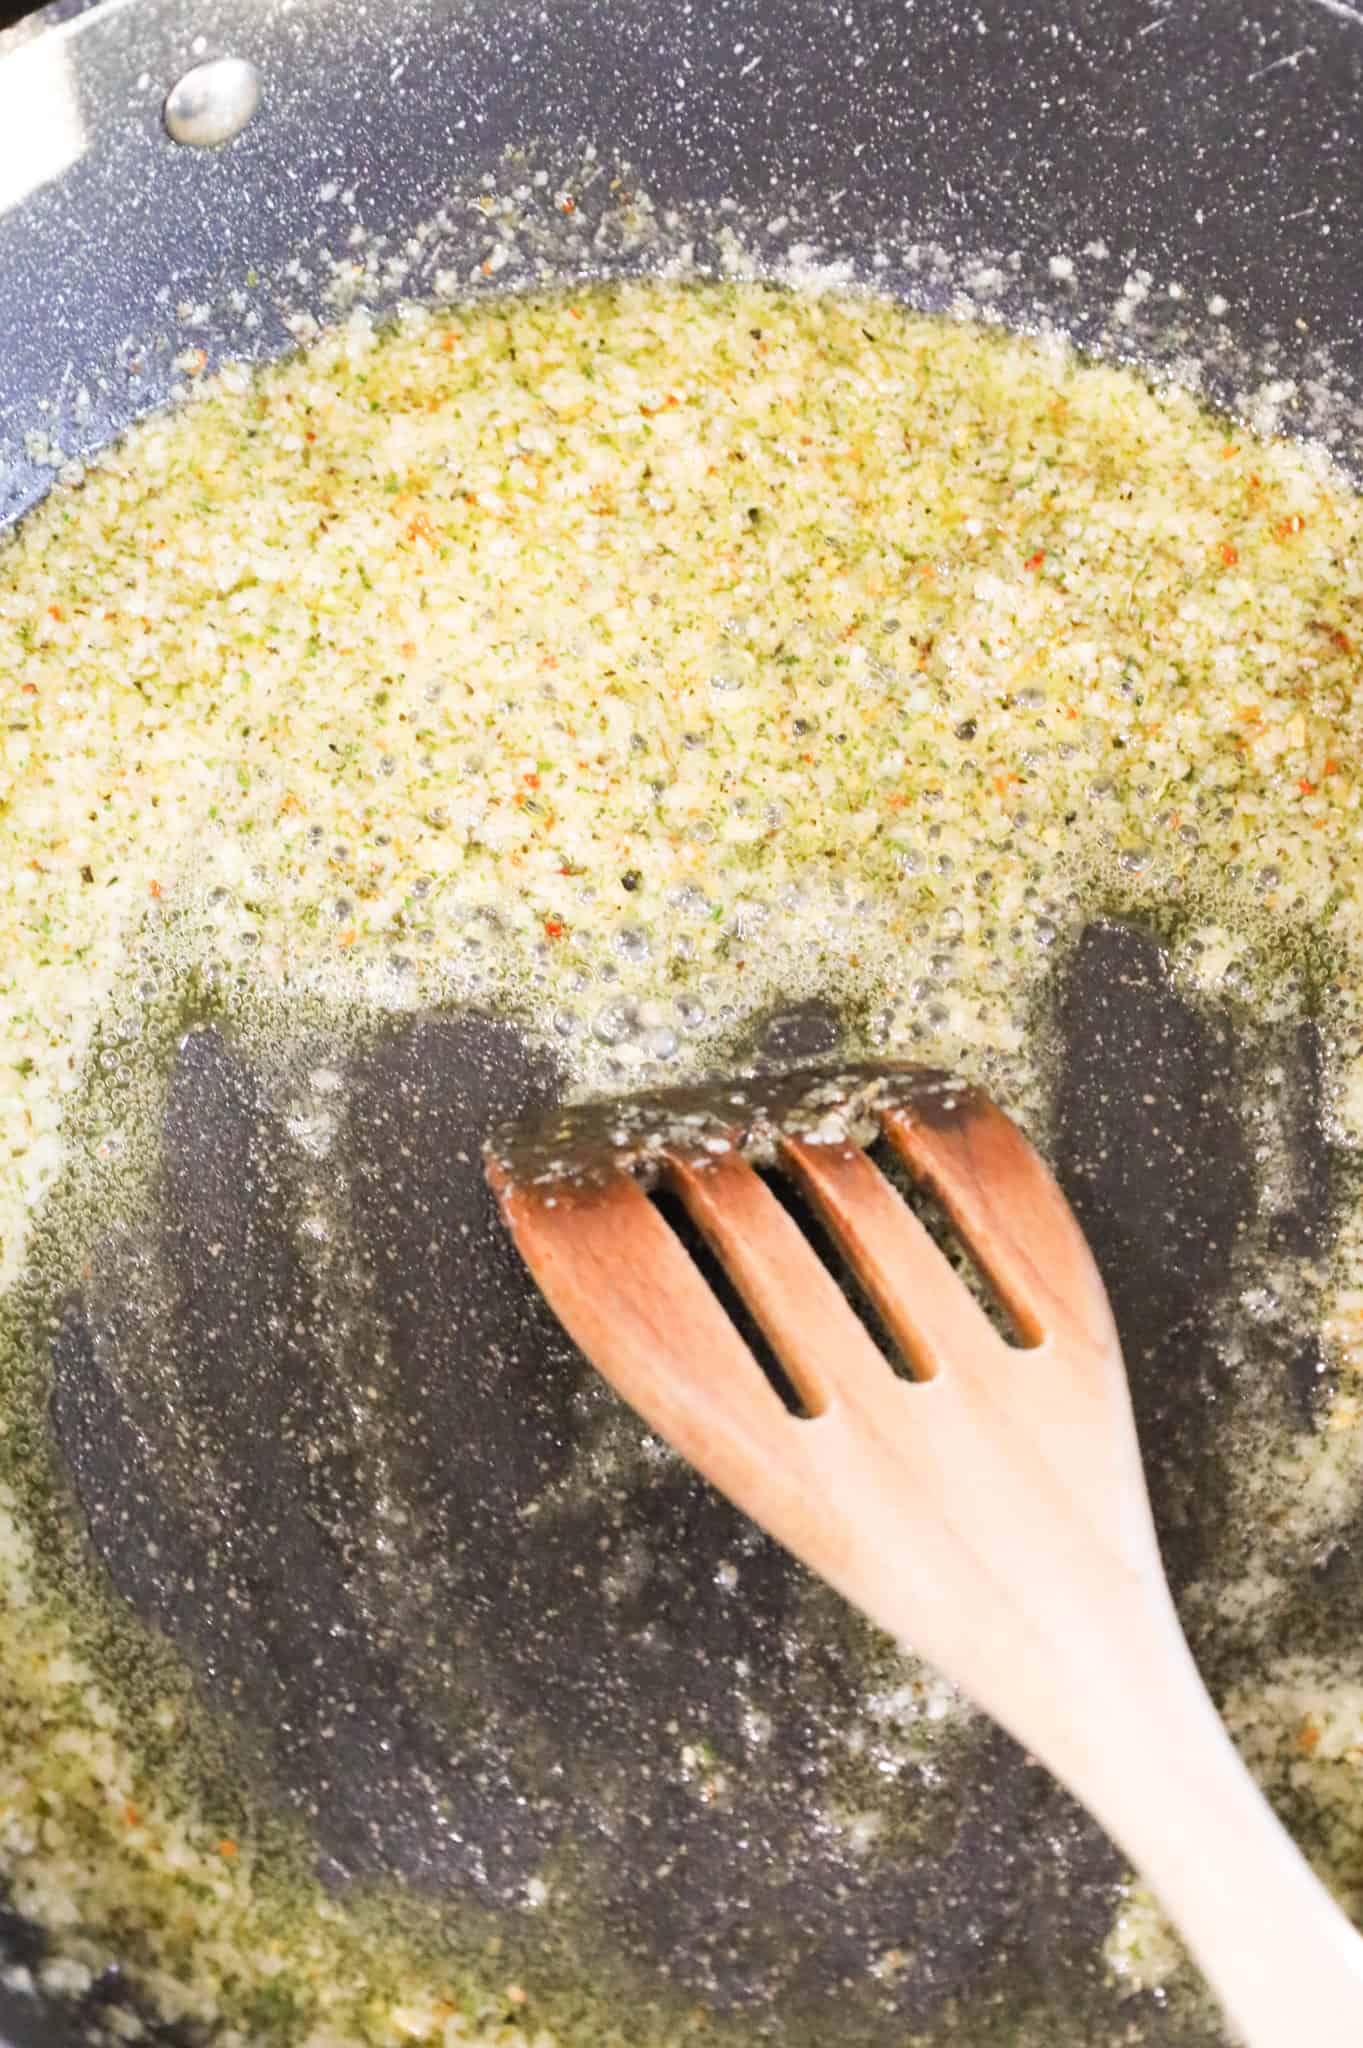 melted butter, garlic puree and Italian seasoning cooking in a skillet